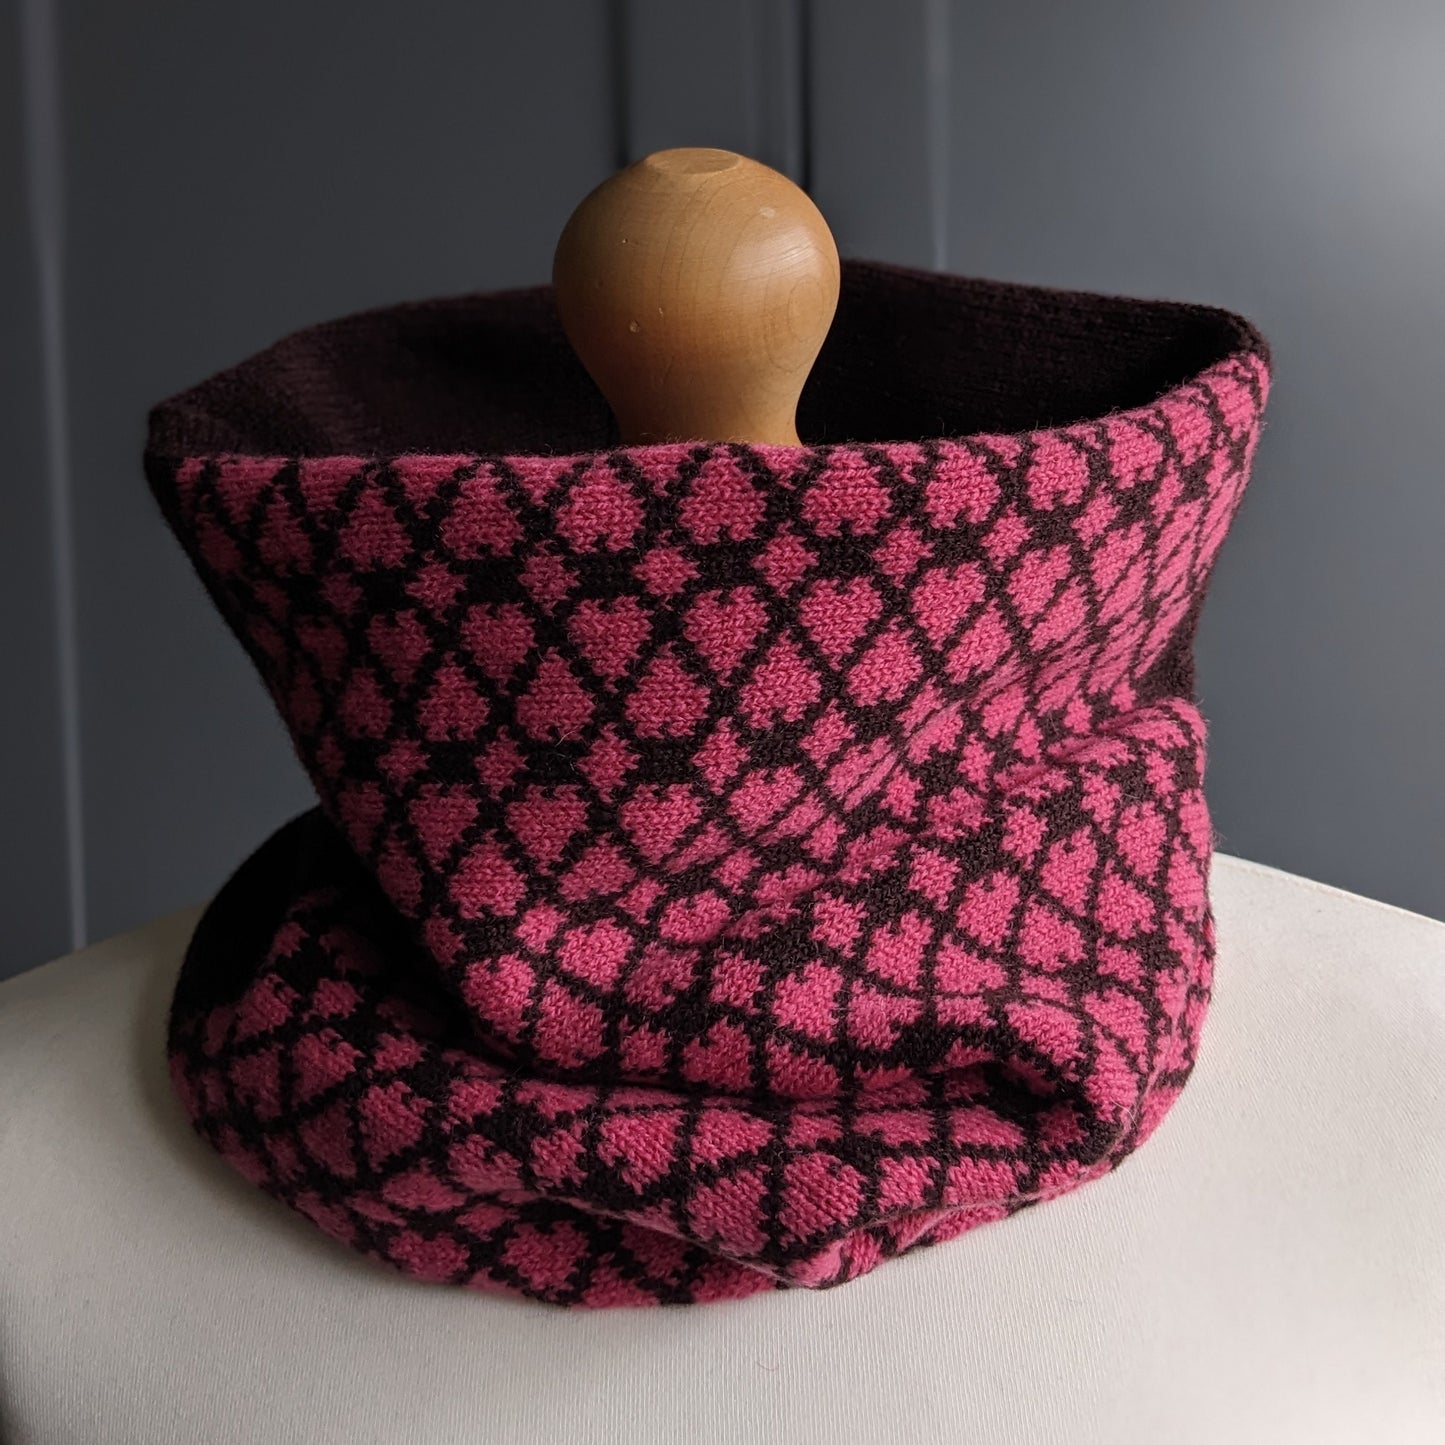 Lambswool knitted Fair Isle cowl in heart design - pink and brown